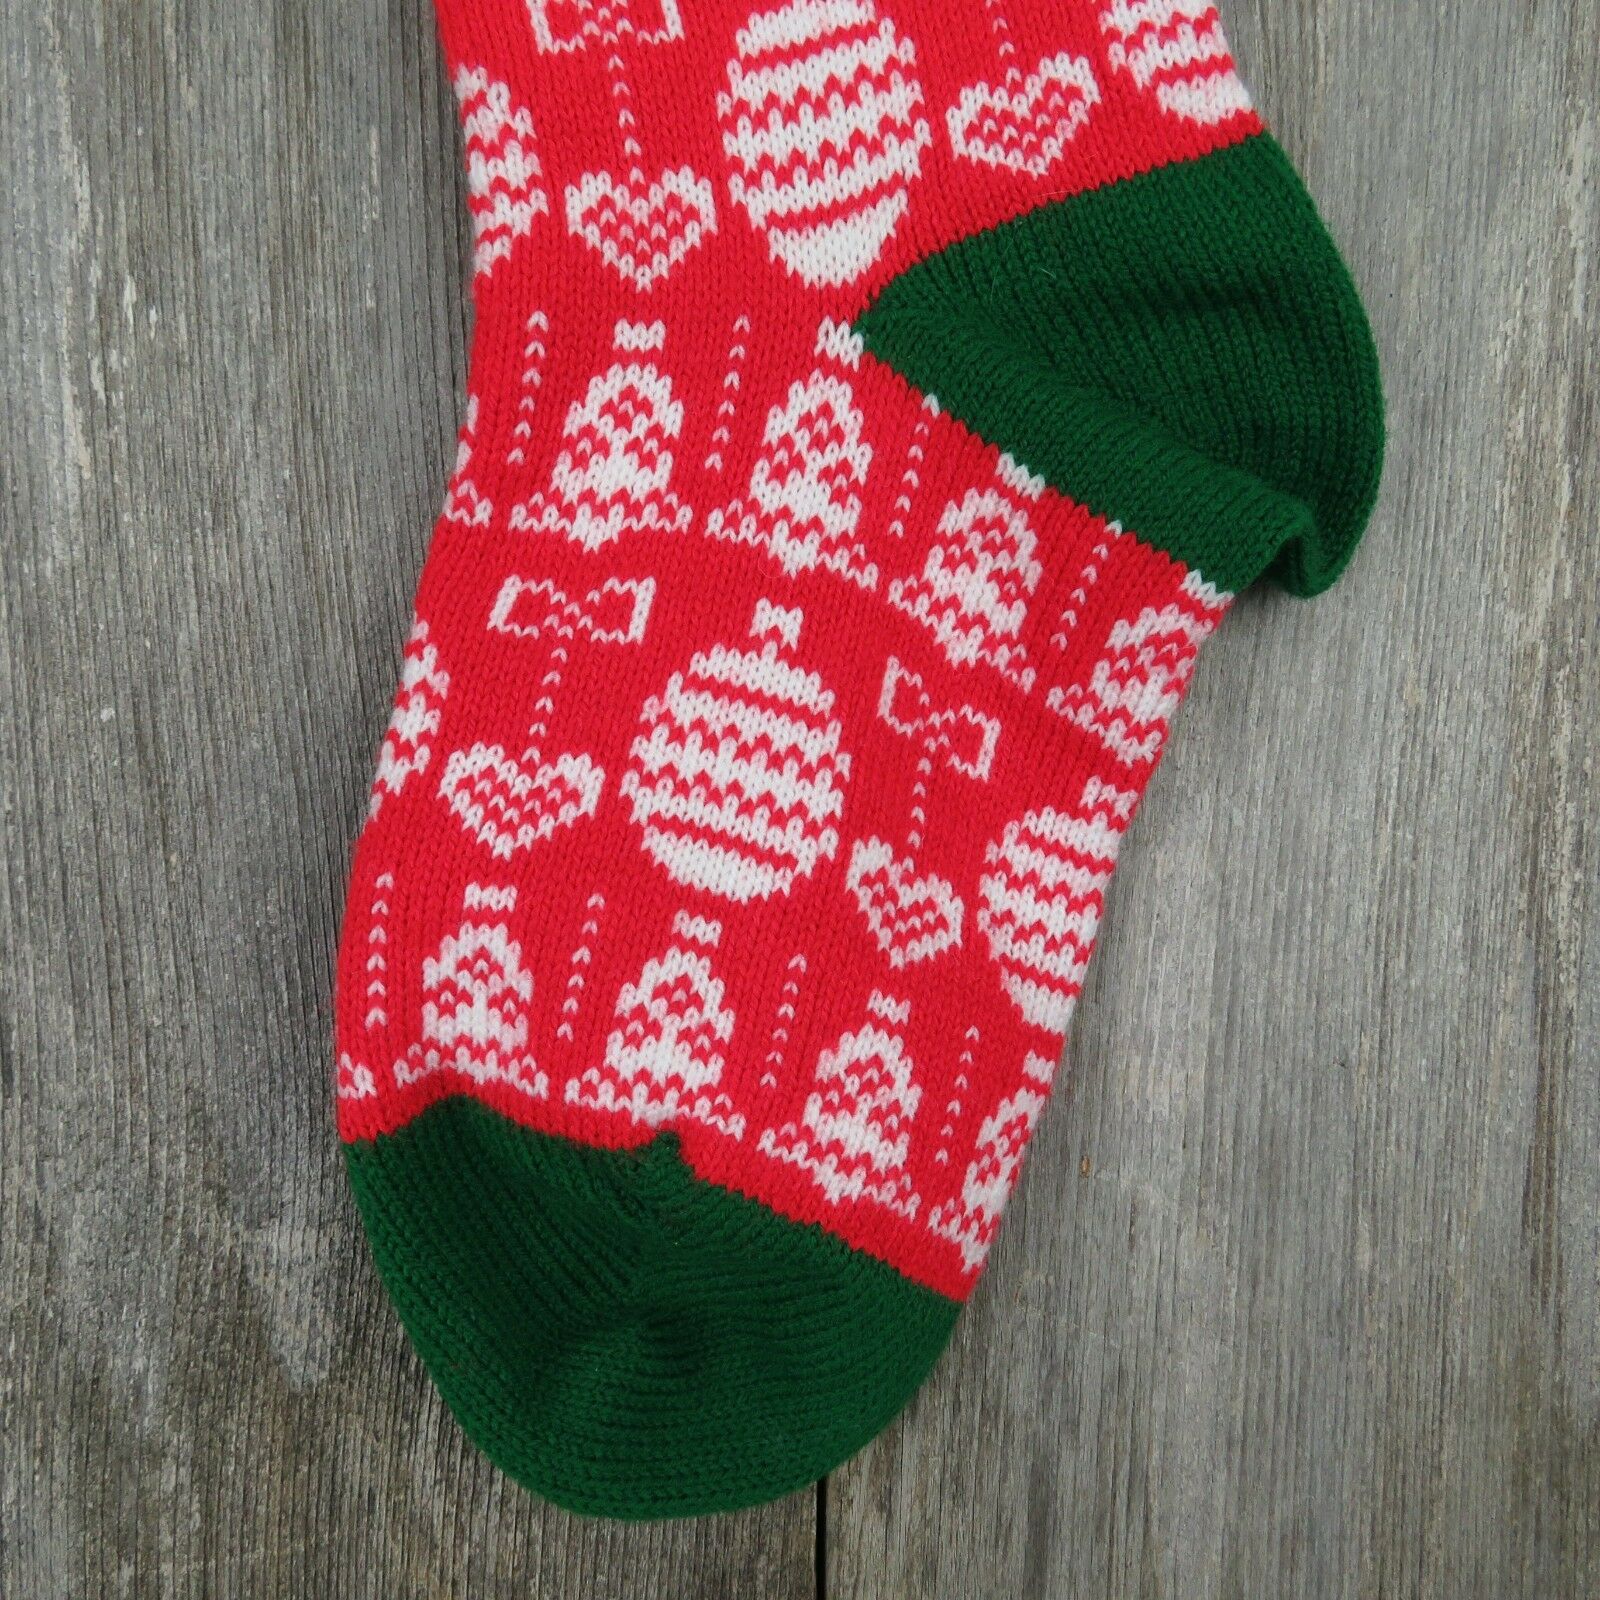 Vintage Christmas Stocking Ornaments Hearts Knitted Knit Green Red Large ST37 - At Grandma's Table